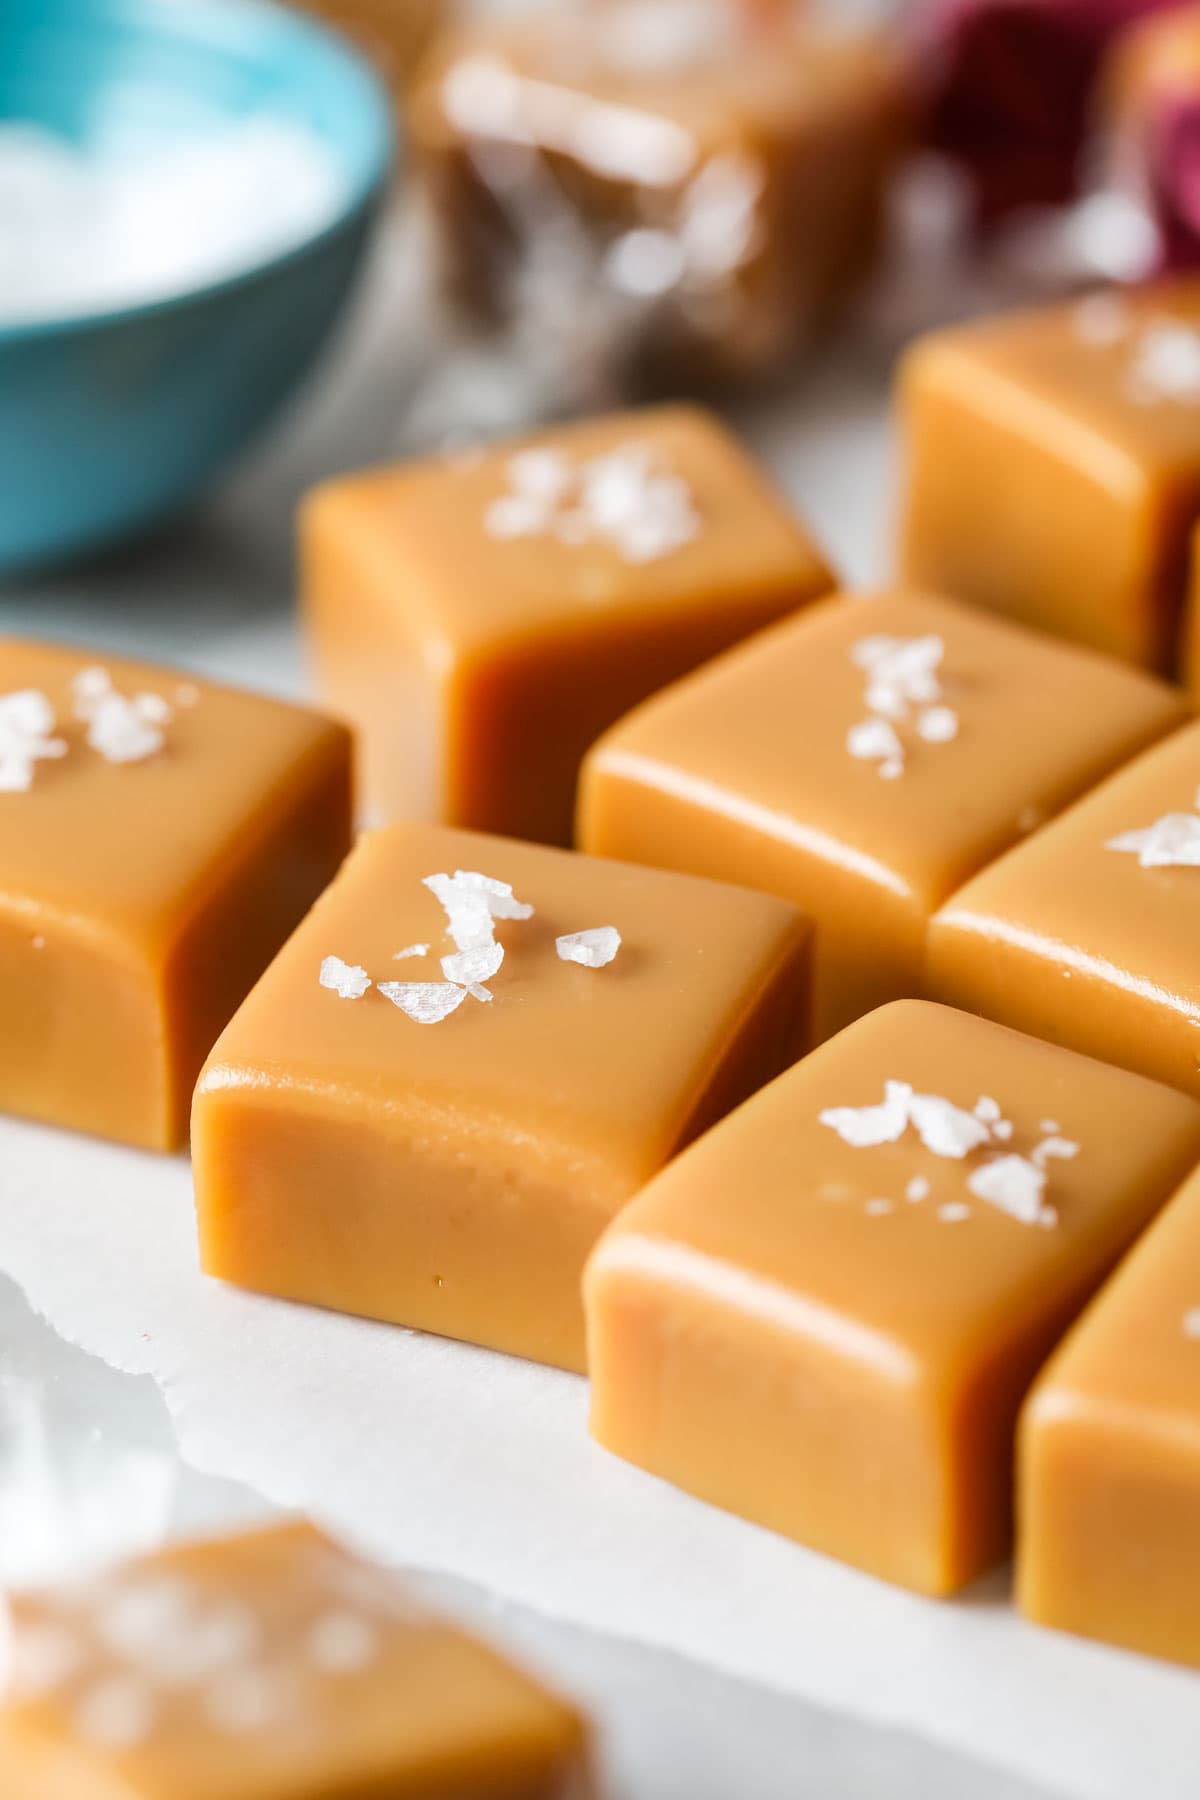 Close up view of squares of homemade caramel topped with flaky sea salt.